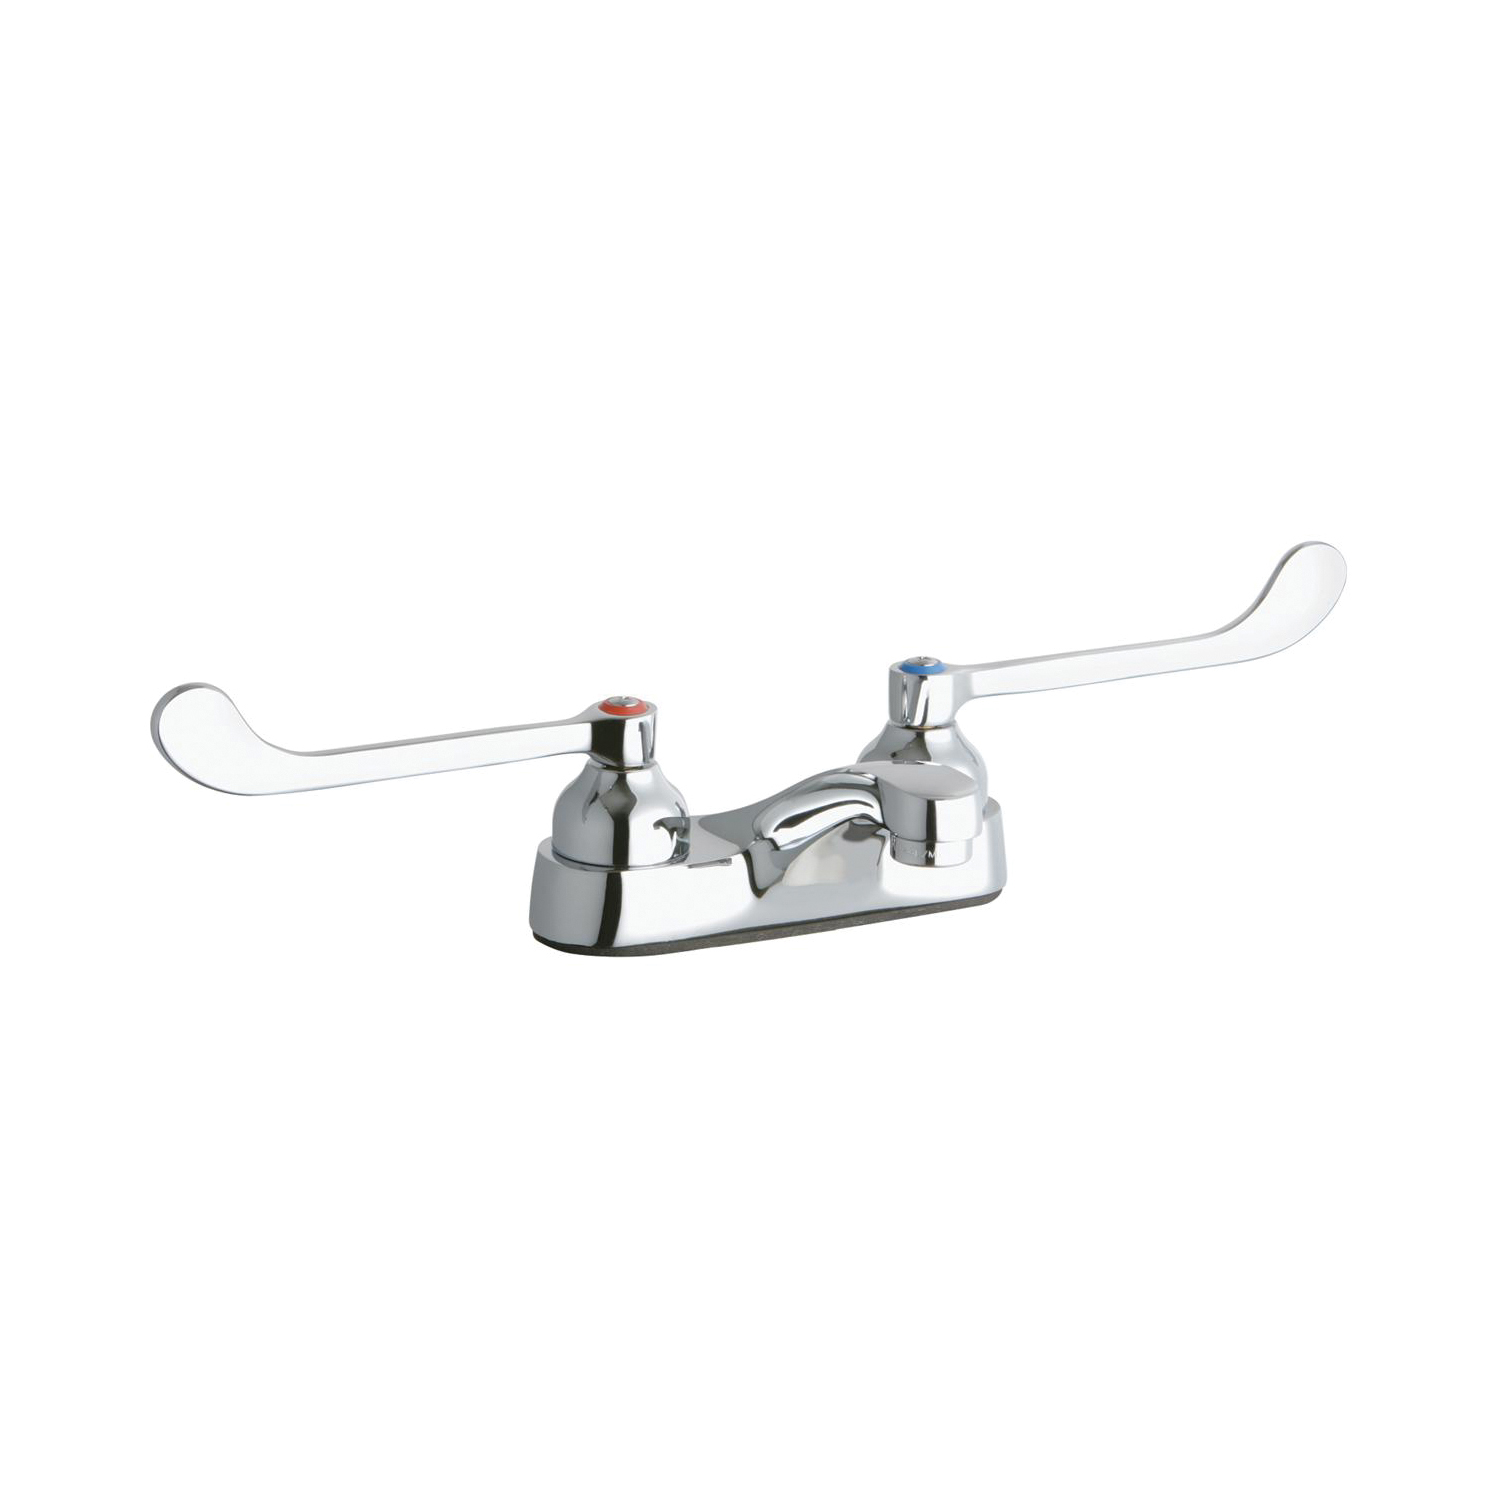 Elkay® LK402T6 Exposed Centerset Bathroom Faucet, Chrome Plated, 2 Handles, 2.2 gpm